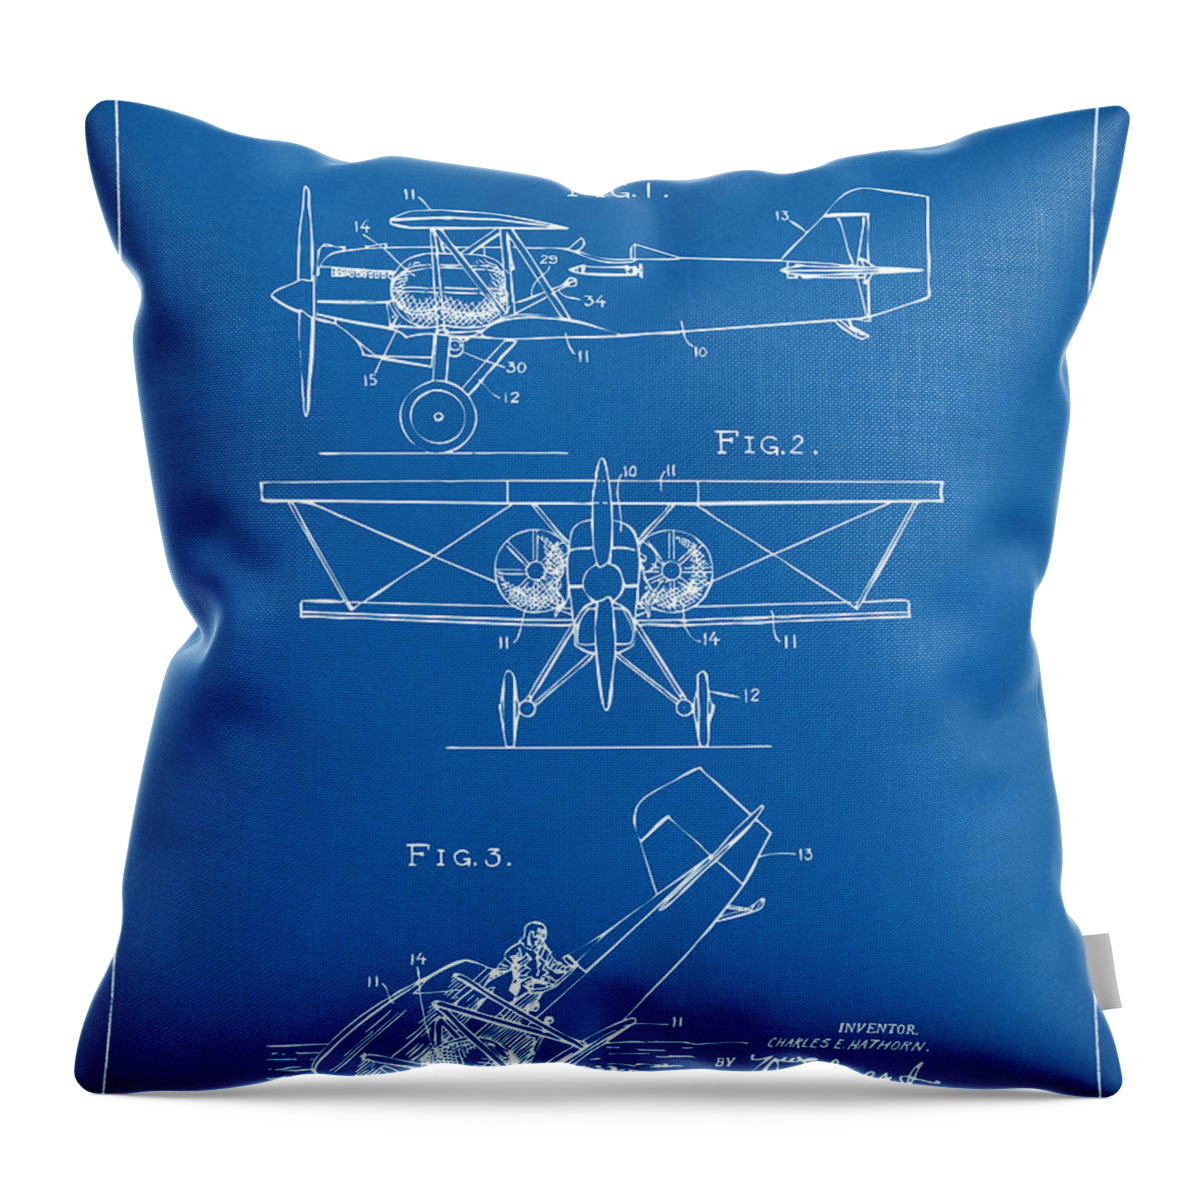 Aircraft Throw Pillow featuring the digital art 1931 Aircraft Emergency Floatation Patent Blueprint by Nikki Marie Smith